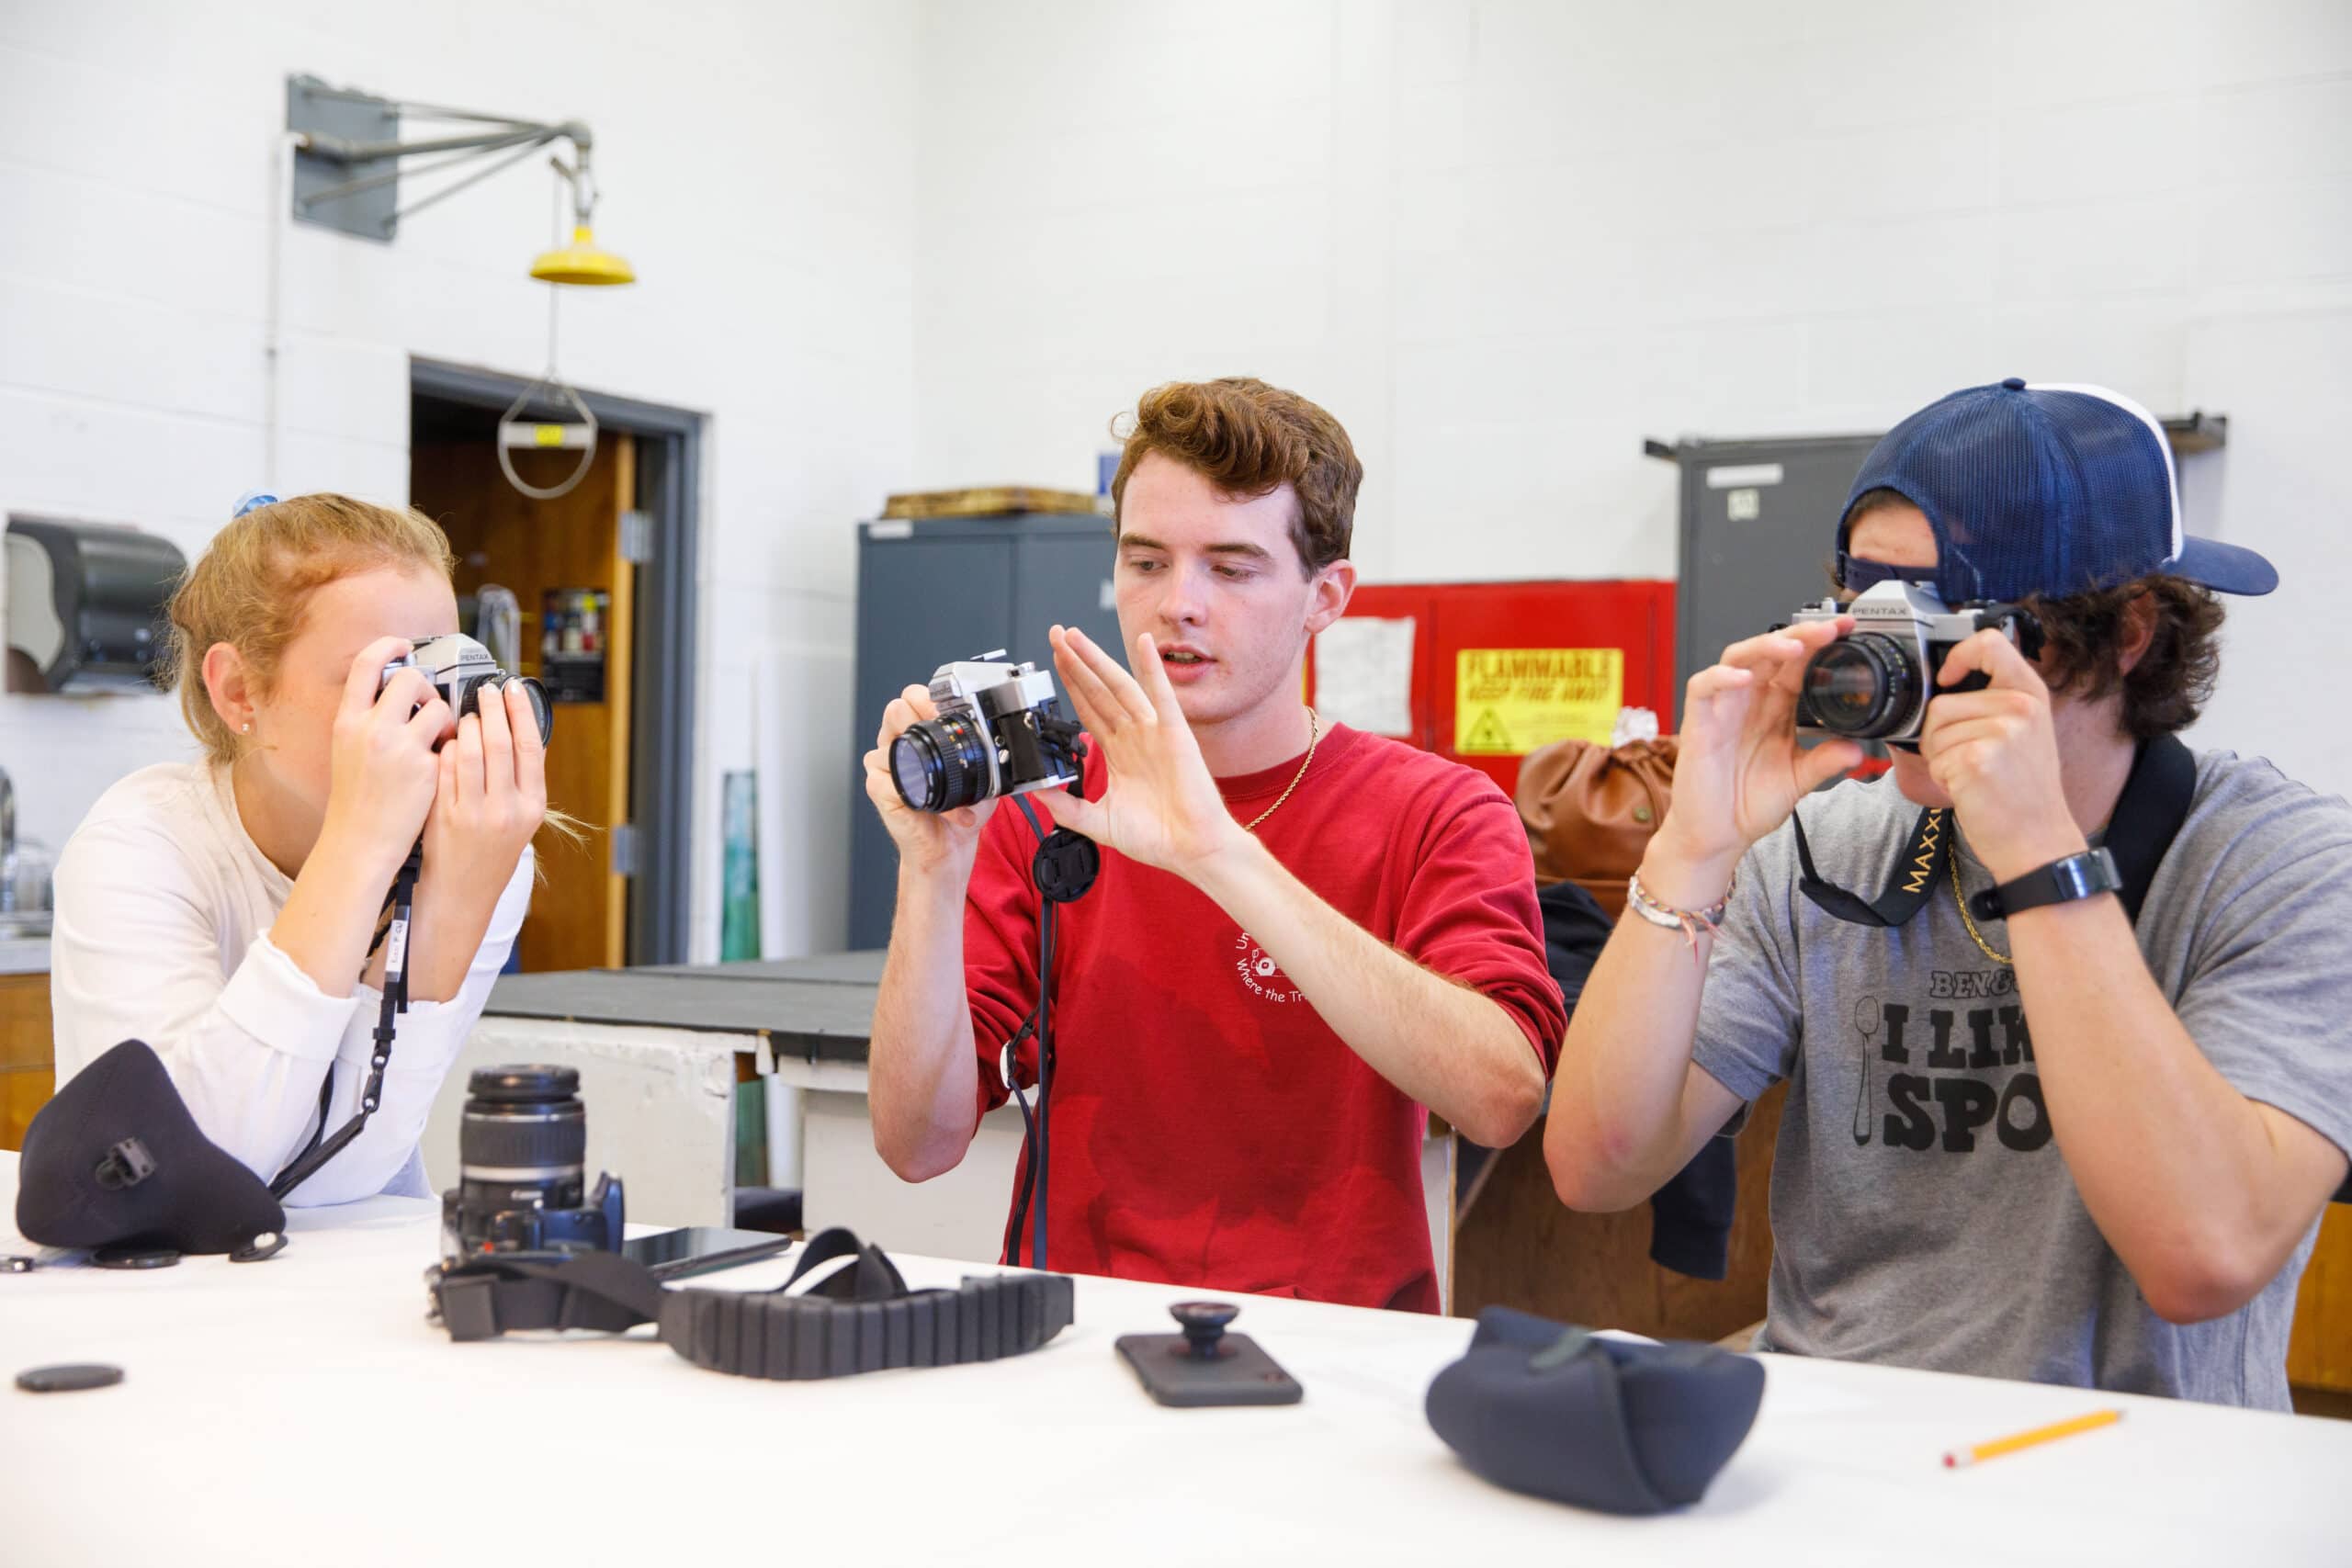 Two young guys and a girl are playing with camera equipment while leaning on a desk.